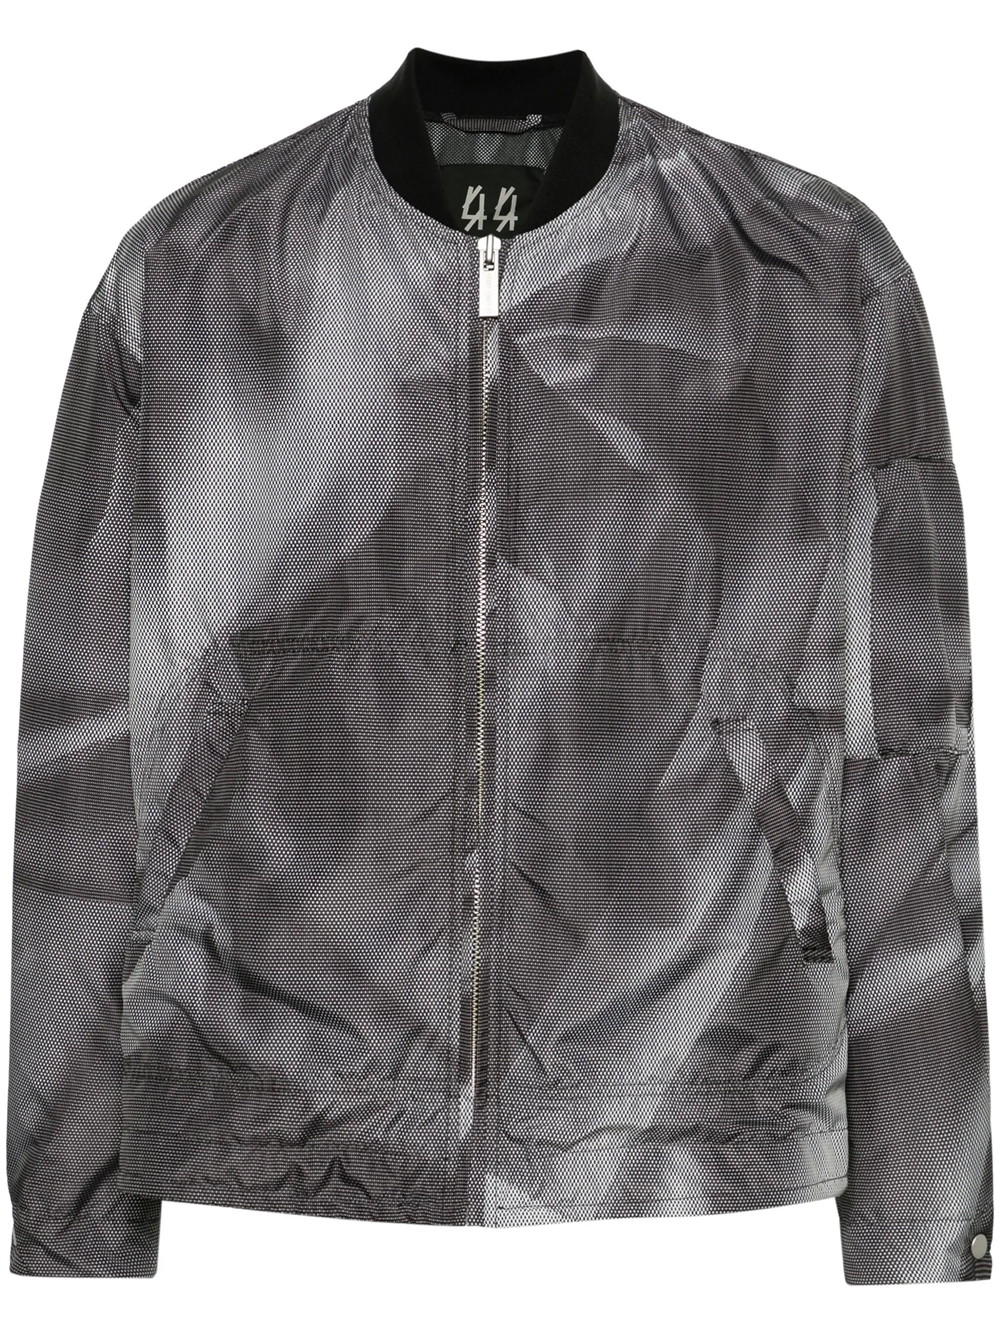 Shop 44 Label Group Crinkle Bomber Jacket With Graphic Print In Black